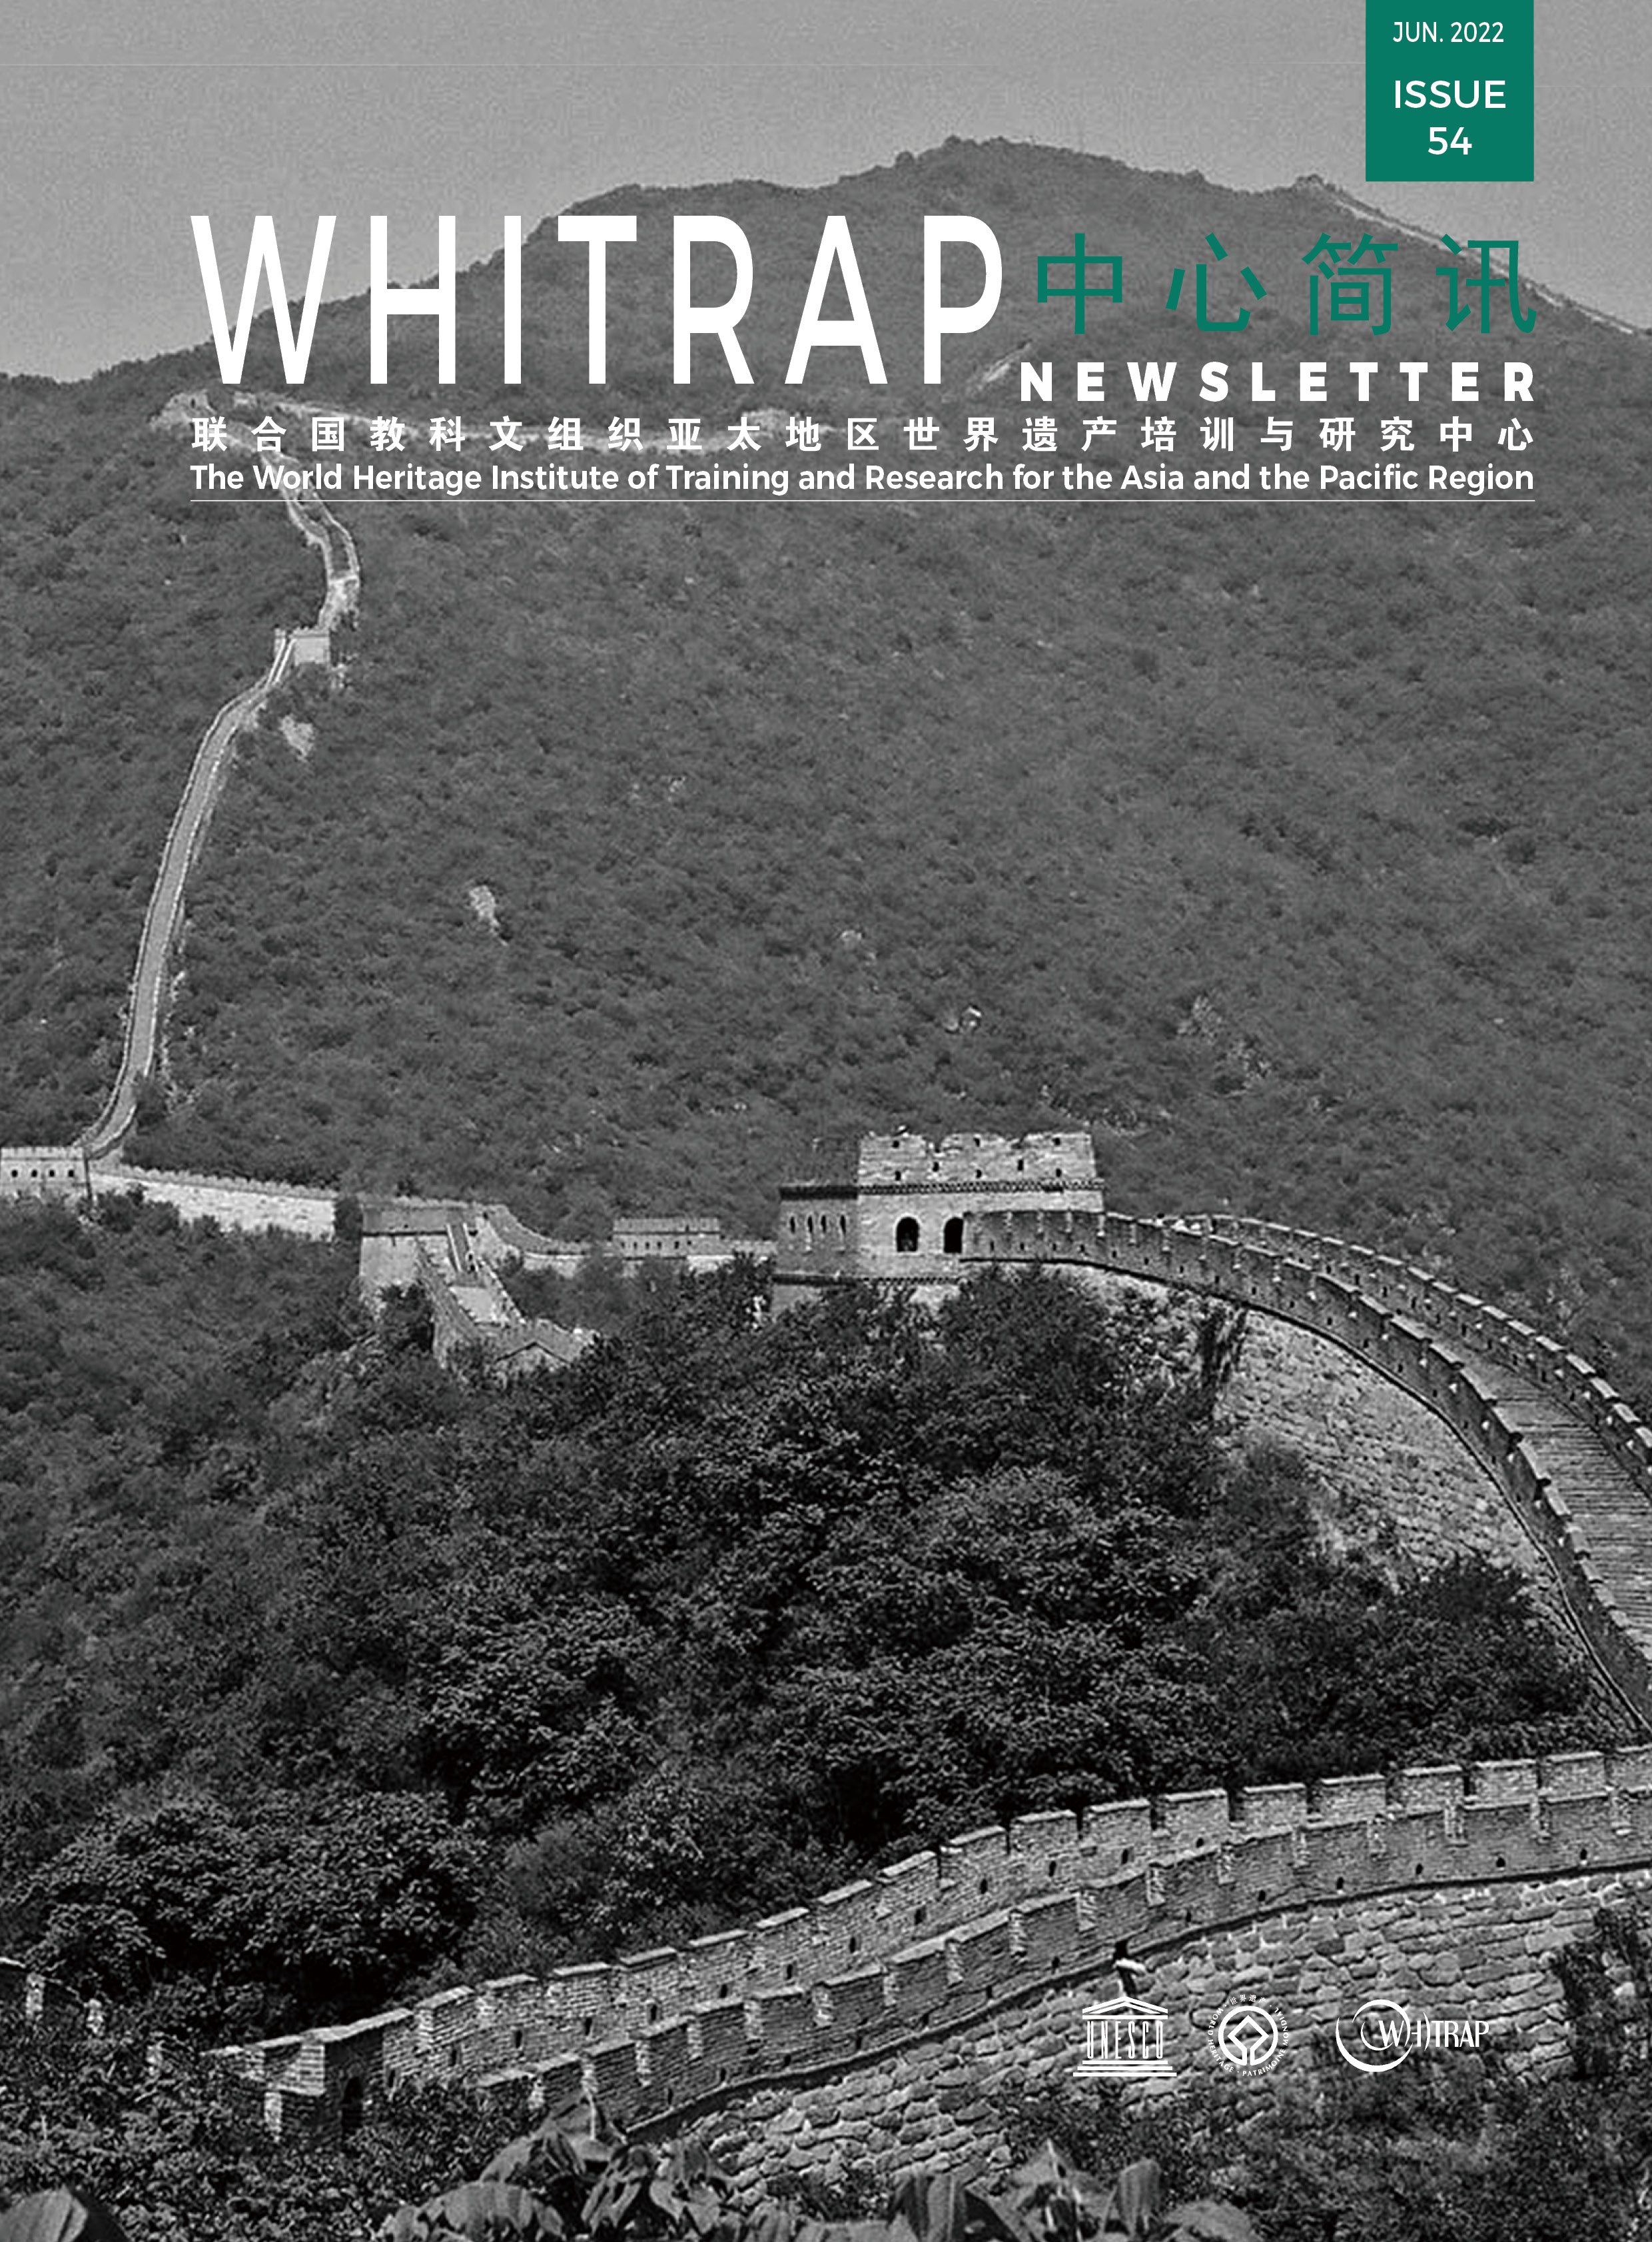 WHITRAP Newsletter (Issue 54)